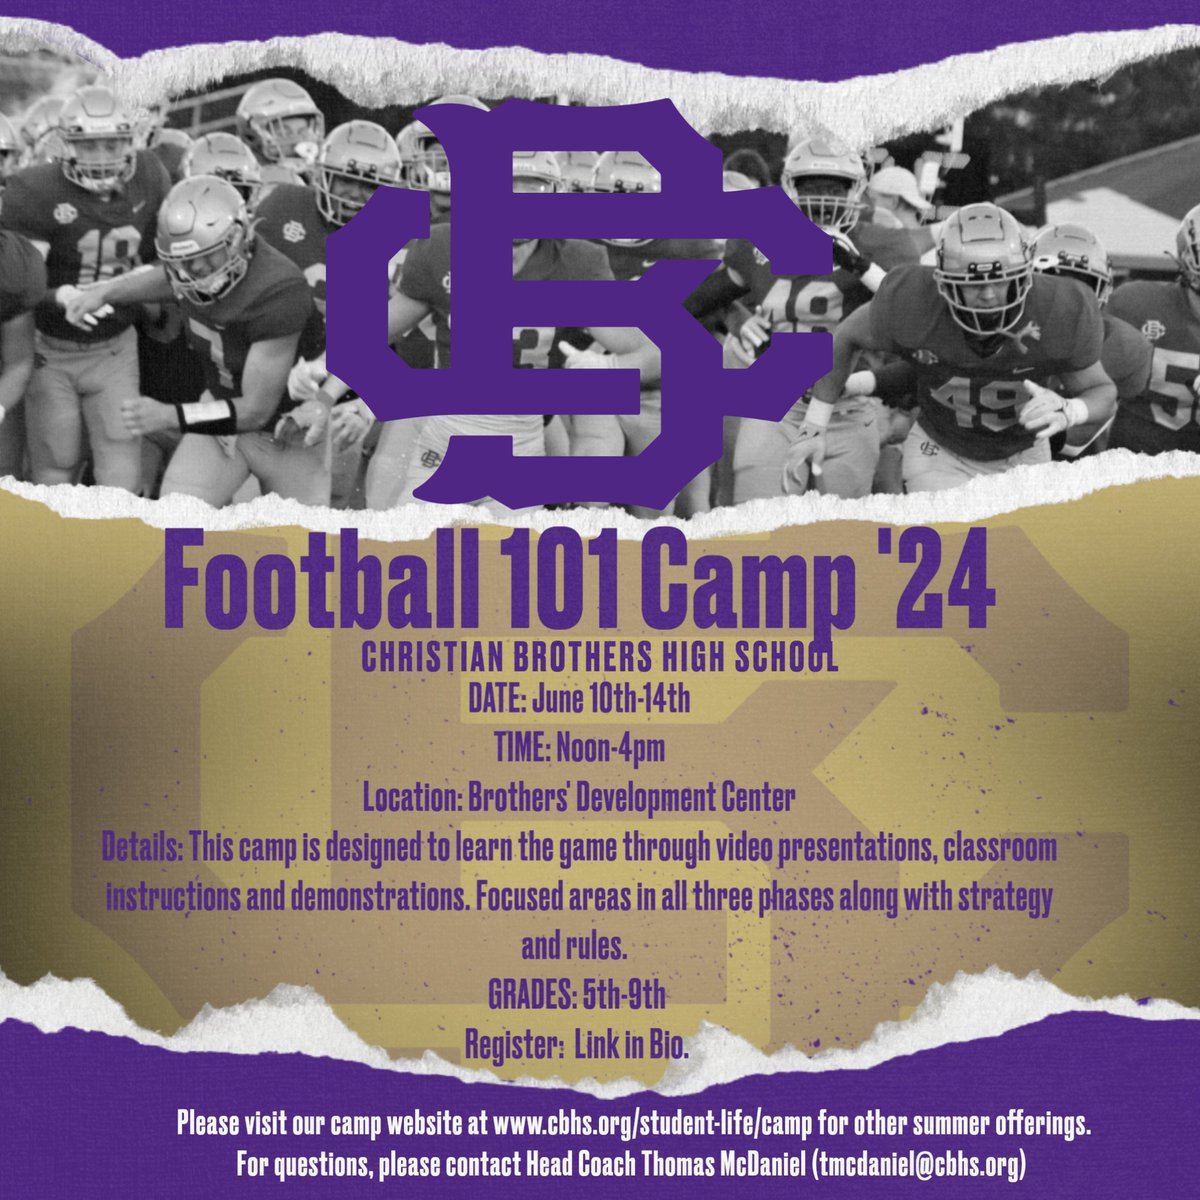 Free Camp Coming Soon. Sign up today. Go Brothers!